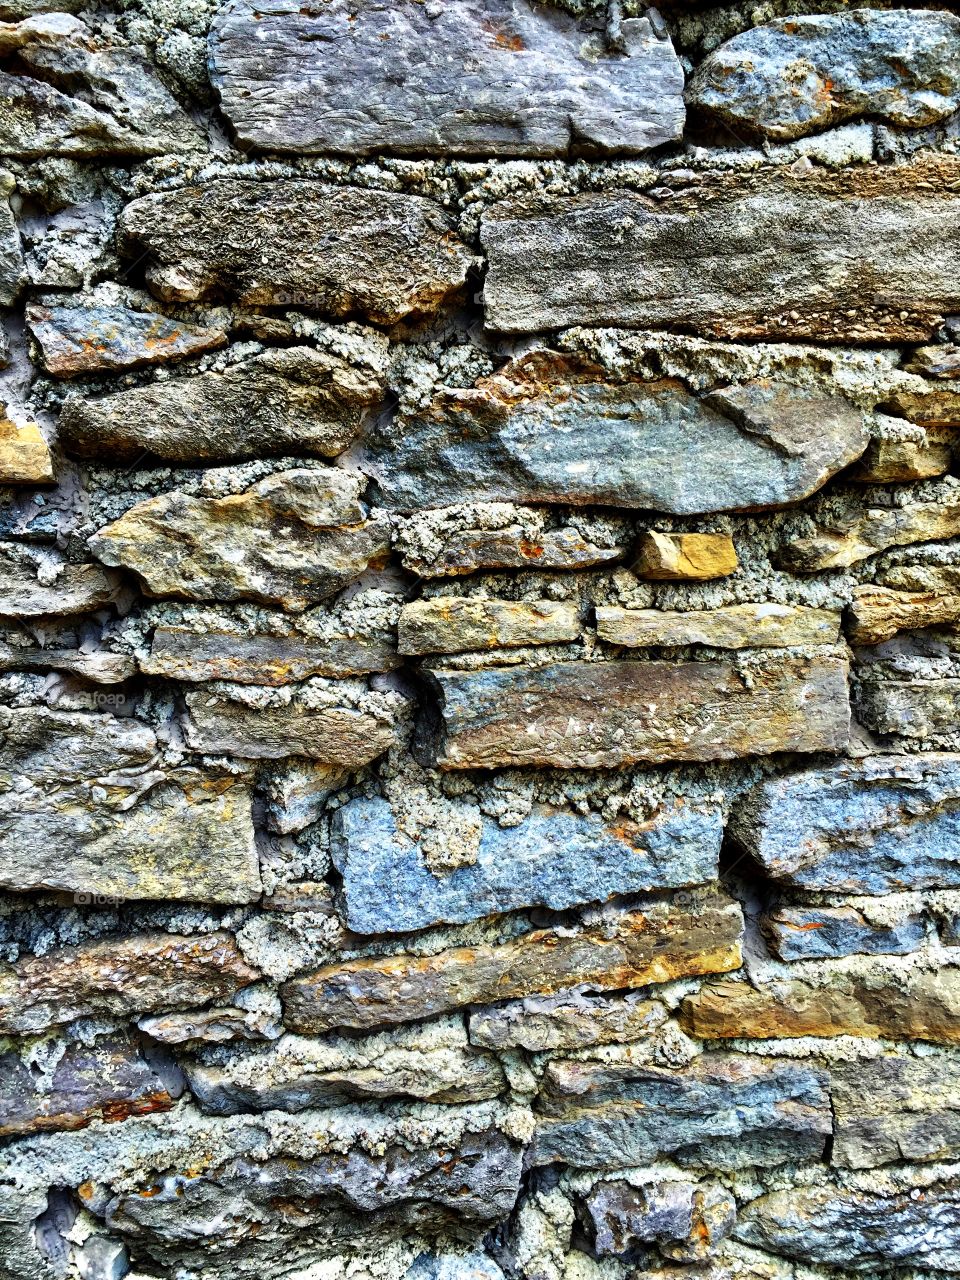 Castle Wall. Taken at the Loveland Castle in Loveland Ohio. One man built it himself all by hand & hard labor. 